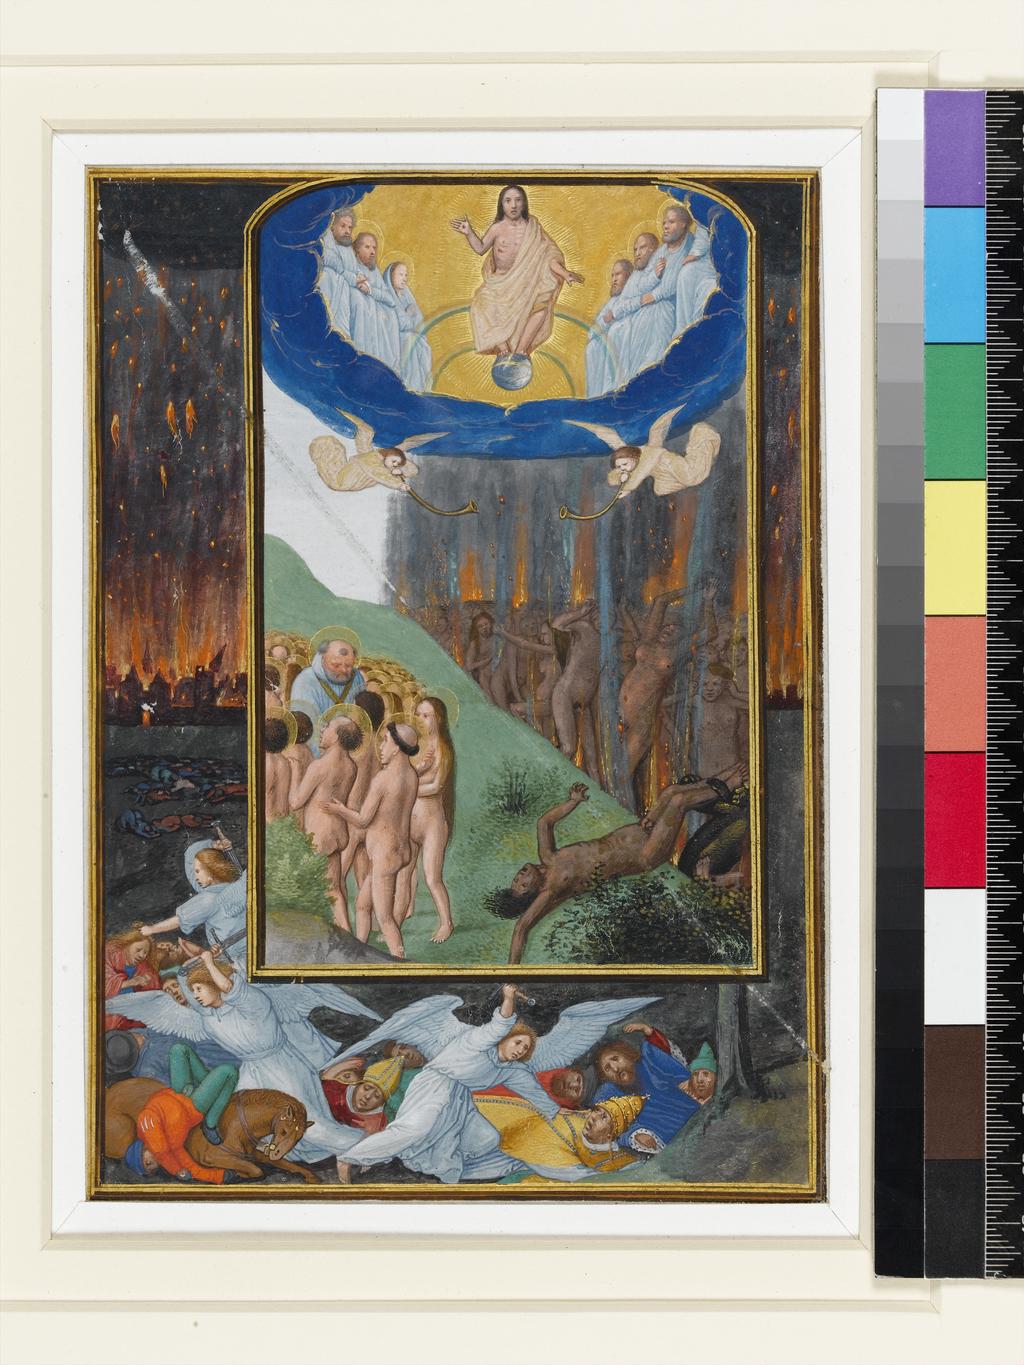 An image of Illuminated Manuscript. Miniature from the Hours of Albrecht of Brandenburg. Penitential Psalms, Last Judgement, border scene based in part on Dürer’s woodcut Massacre by the Four Angels (Apc ix). Simon Bening (Flemish, 1483-1561). Parchment, gold, six leaves with closely trimmed margins, framed illuminated area 175 x 125 mm, no text or ruling on reverse, 1522-1523. Production Place: Bruges, Flanders.